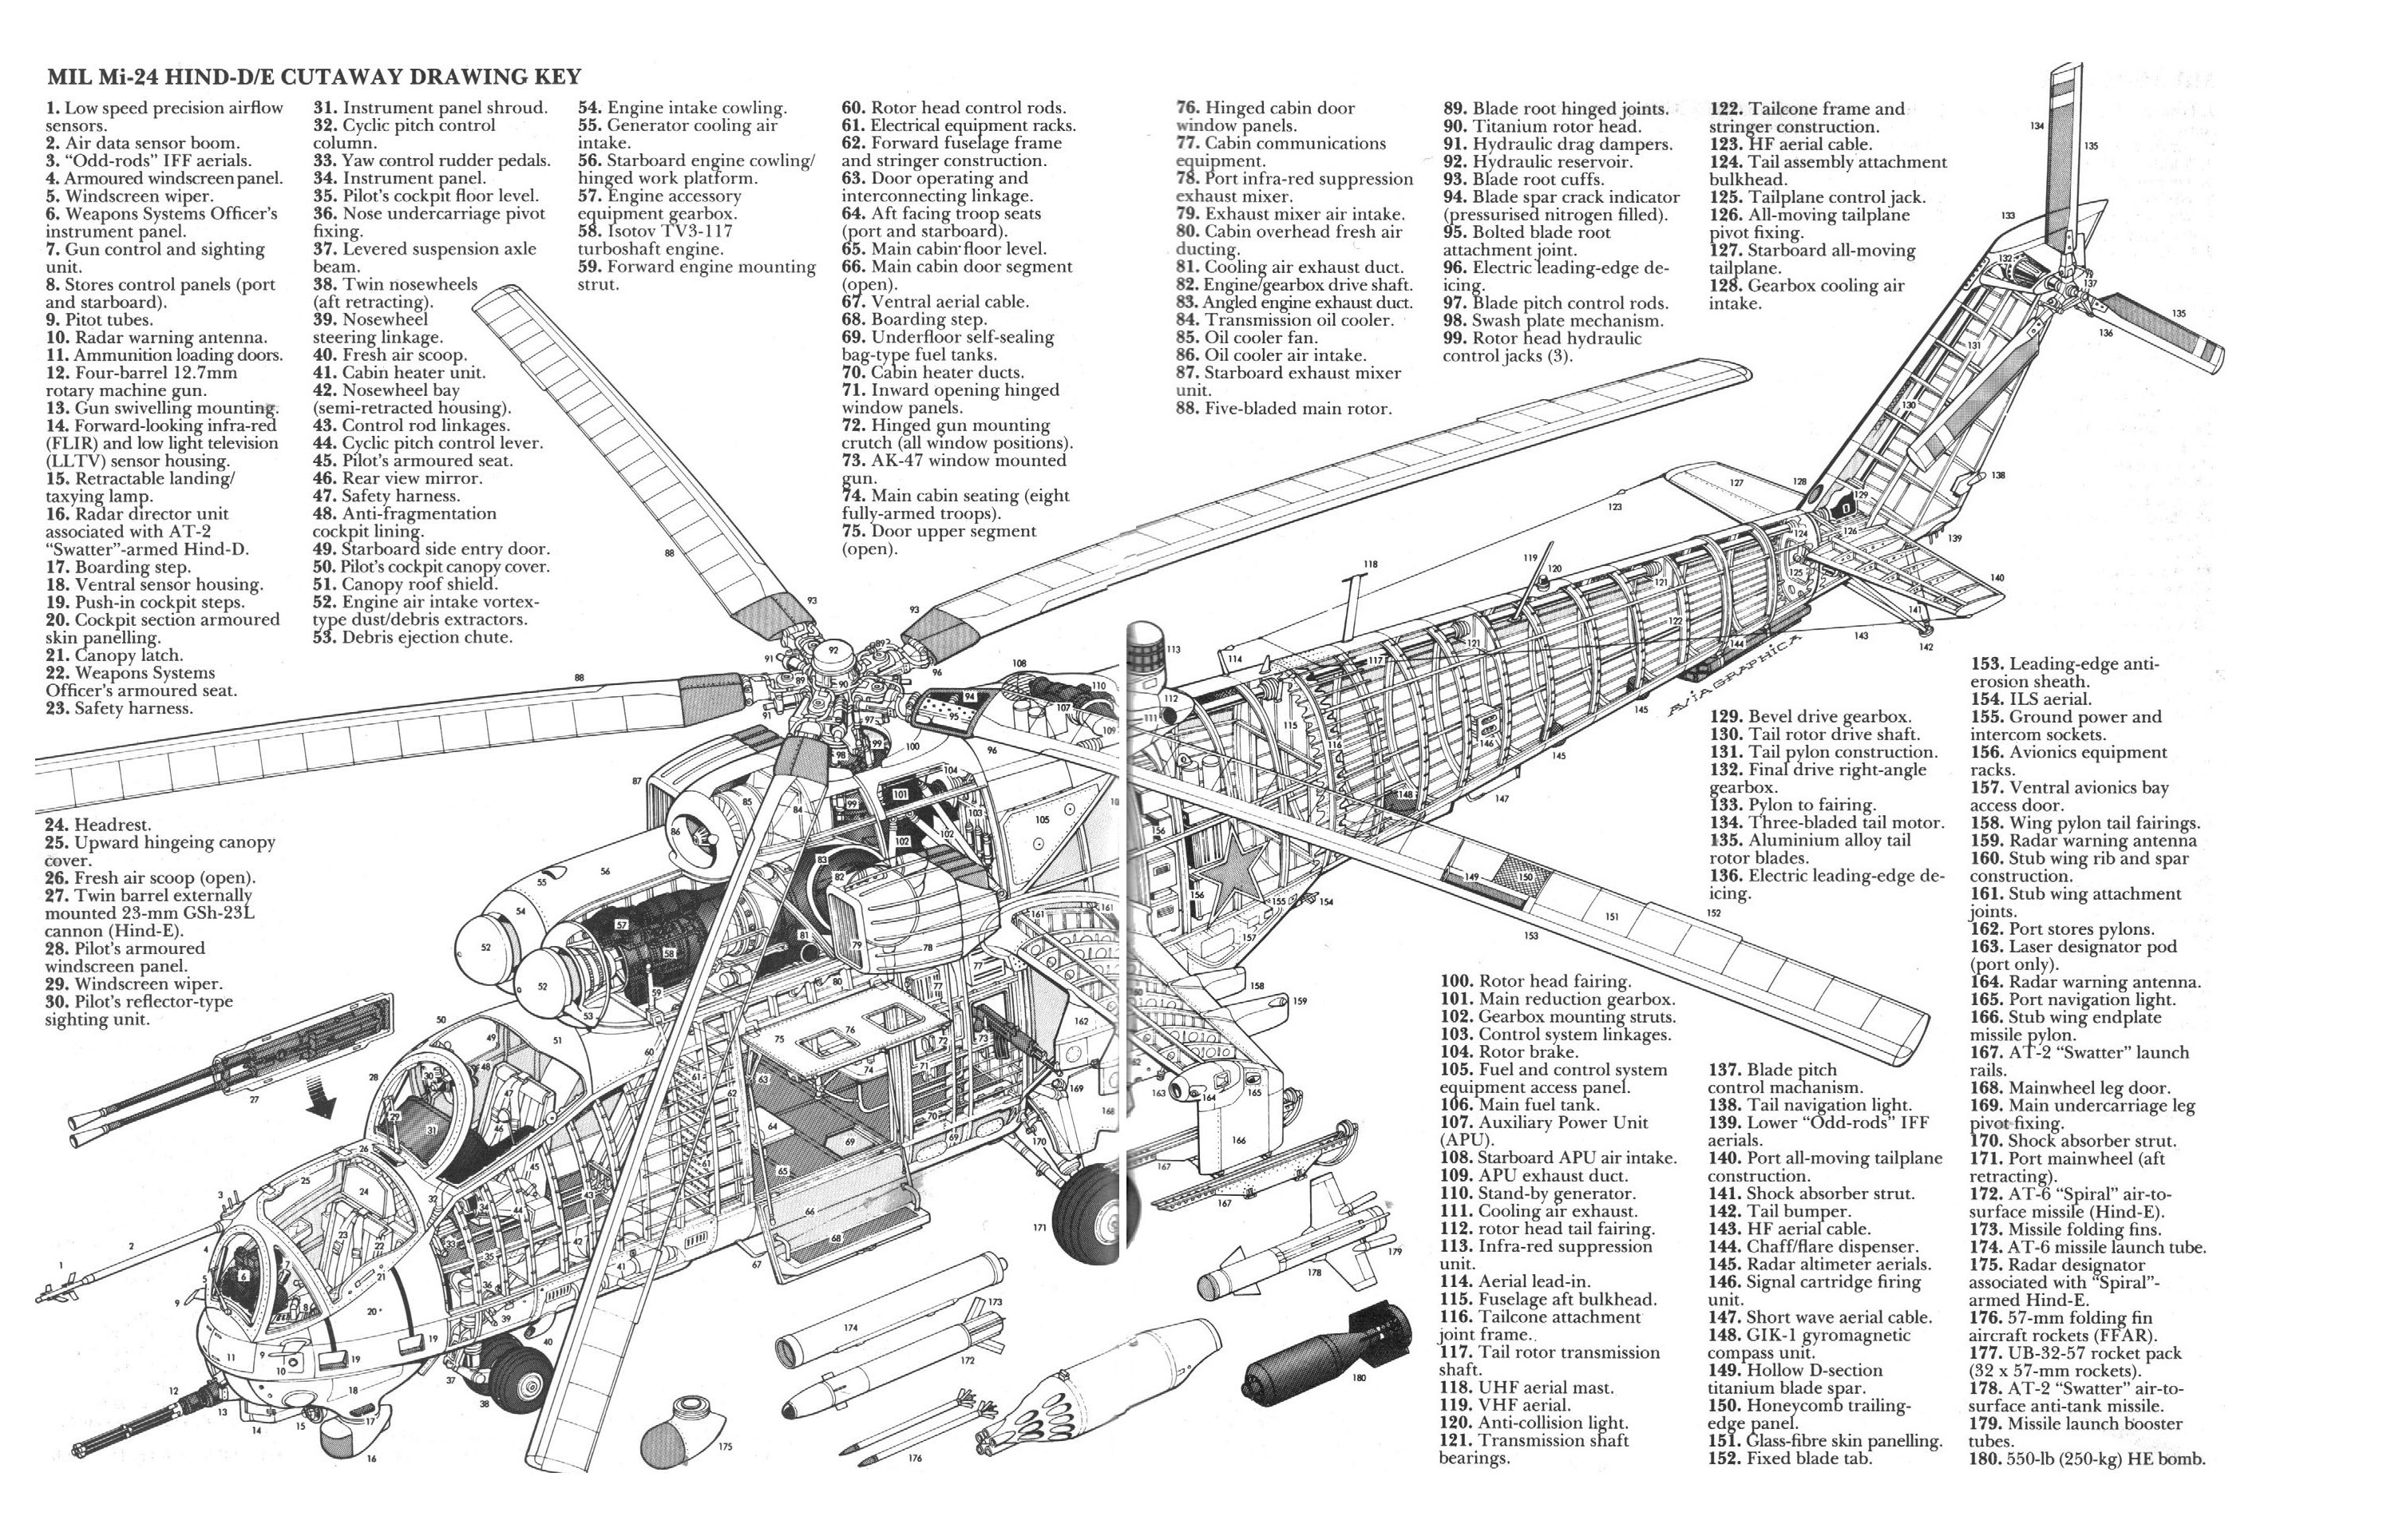 helicopters, Mi 24, Aviation, Helicopter, Schematics, Schematic, Diagram, Texts, Military Wallpaper